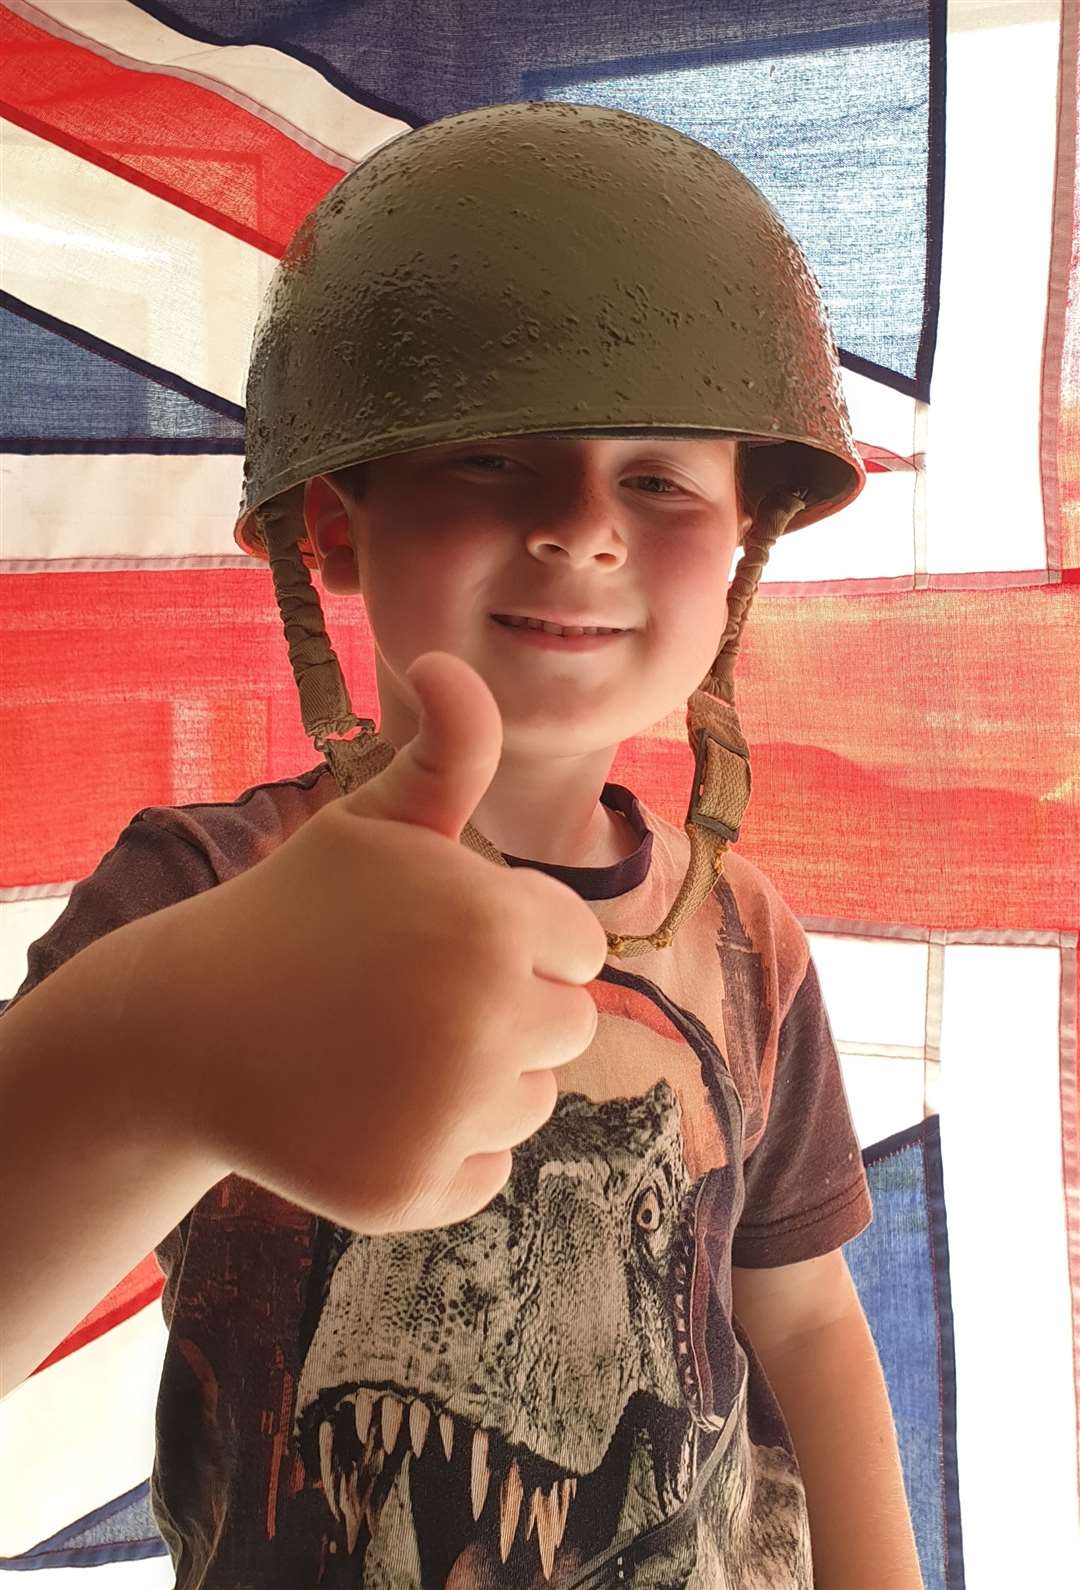 Teddie Bloxham, a young history fan, decorated his house and donned a military helmet for VE Day 75